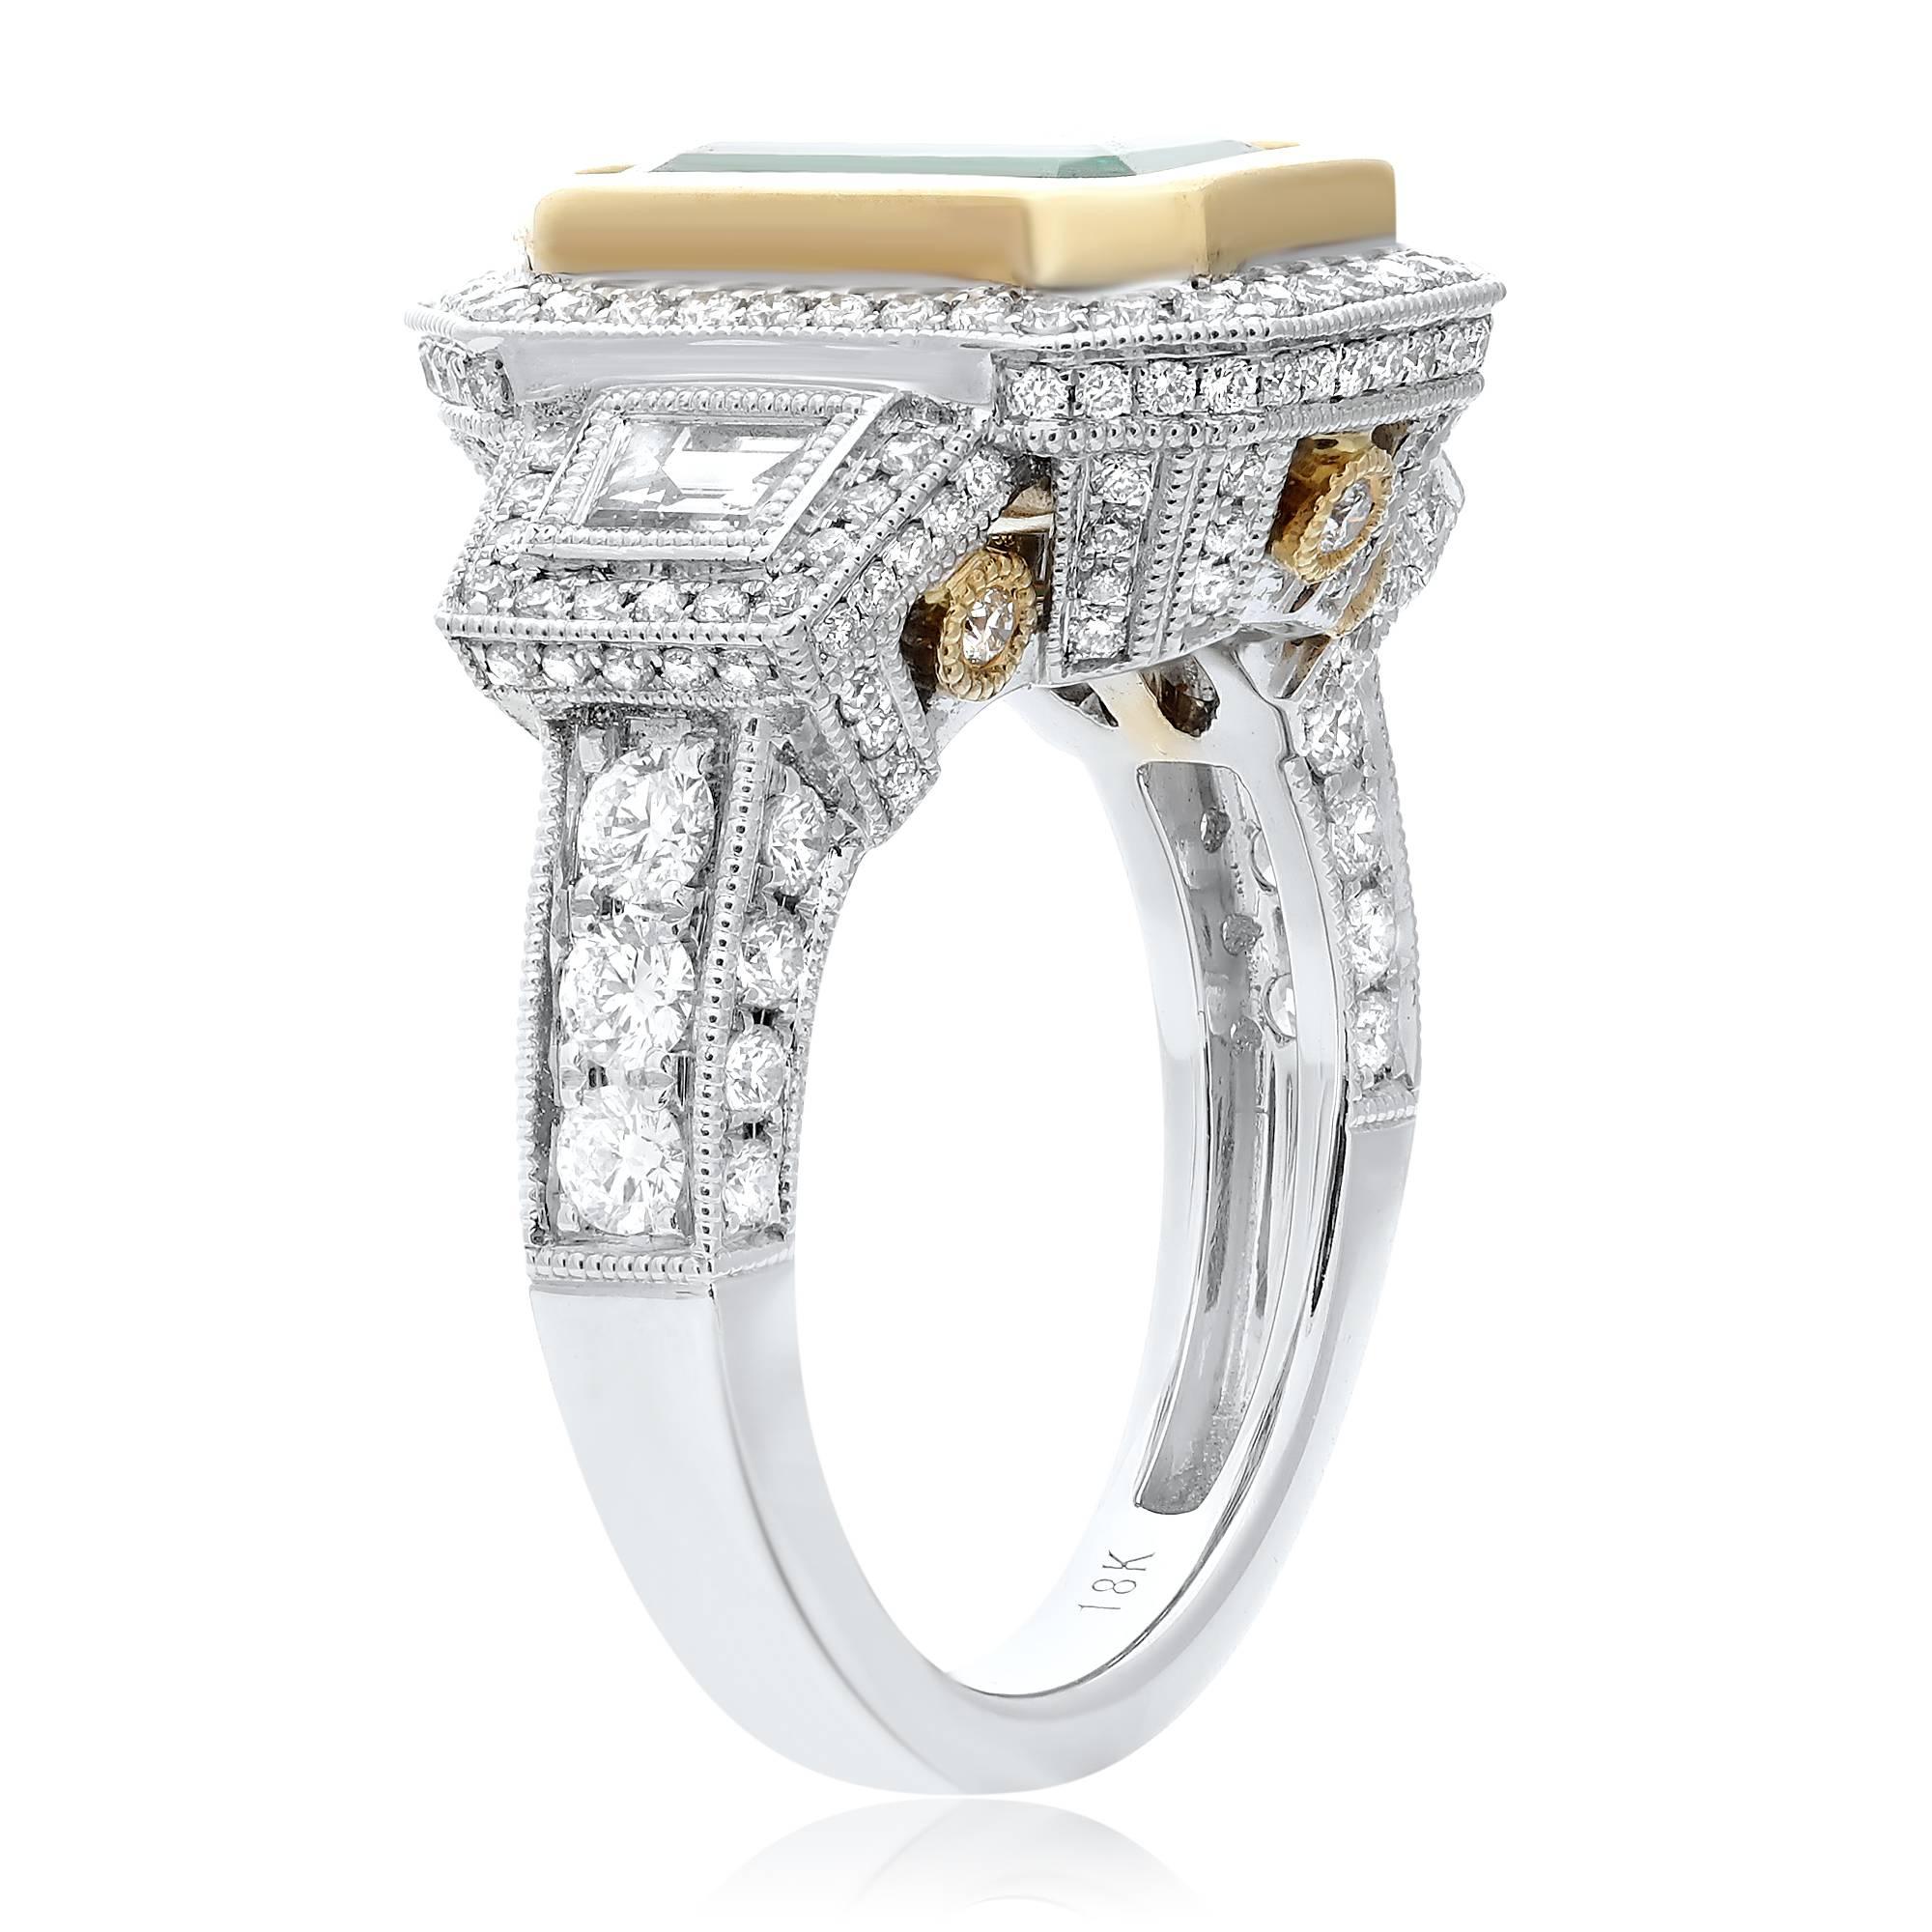 3.84 carat EGL certified Emerald Cut Emerald bezel set in 18k yellow gold. Beautiful deep green emerald is flanked by two perfectly matched diamond trapezoids. Diamond pave around the three main stones and around the basket. Style is enhanced by